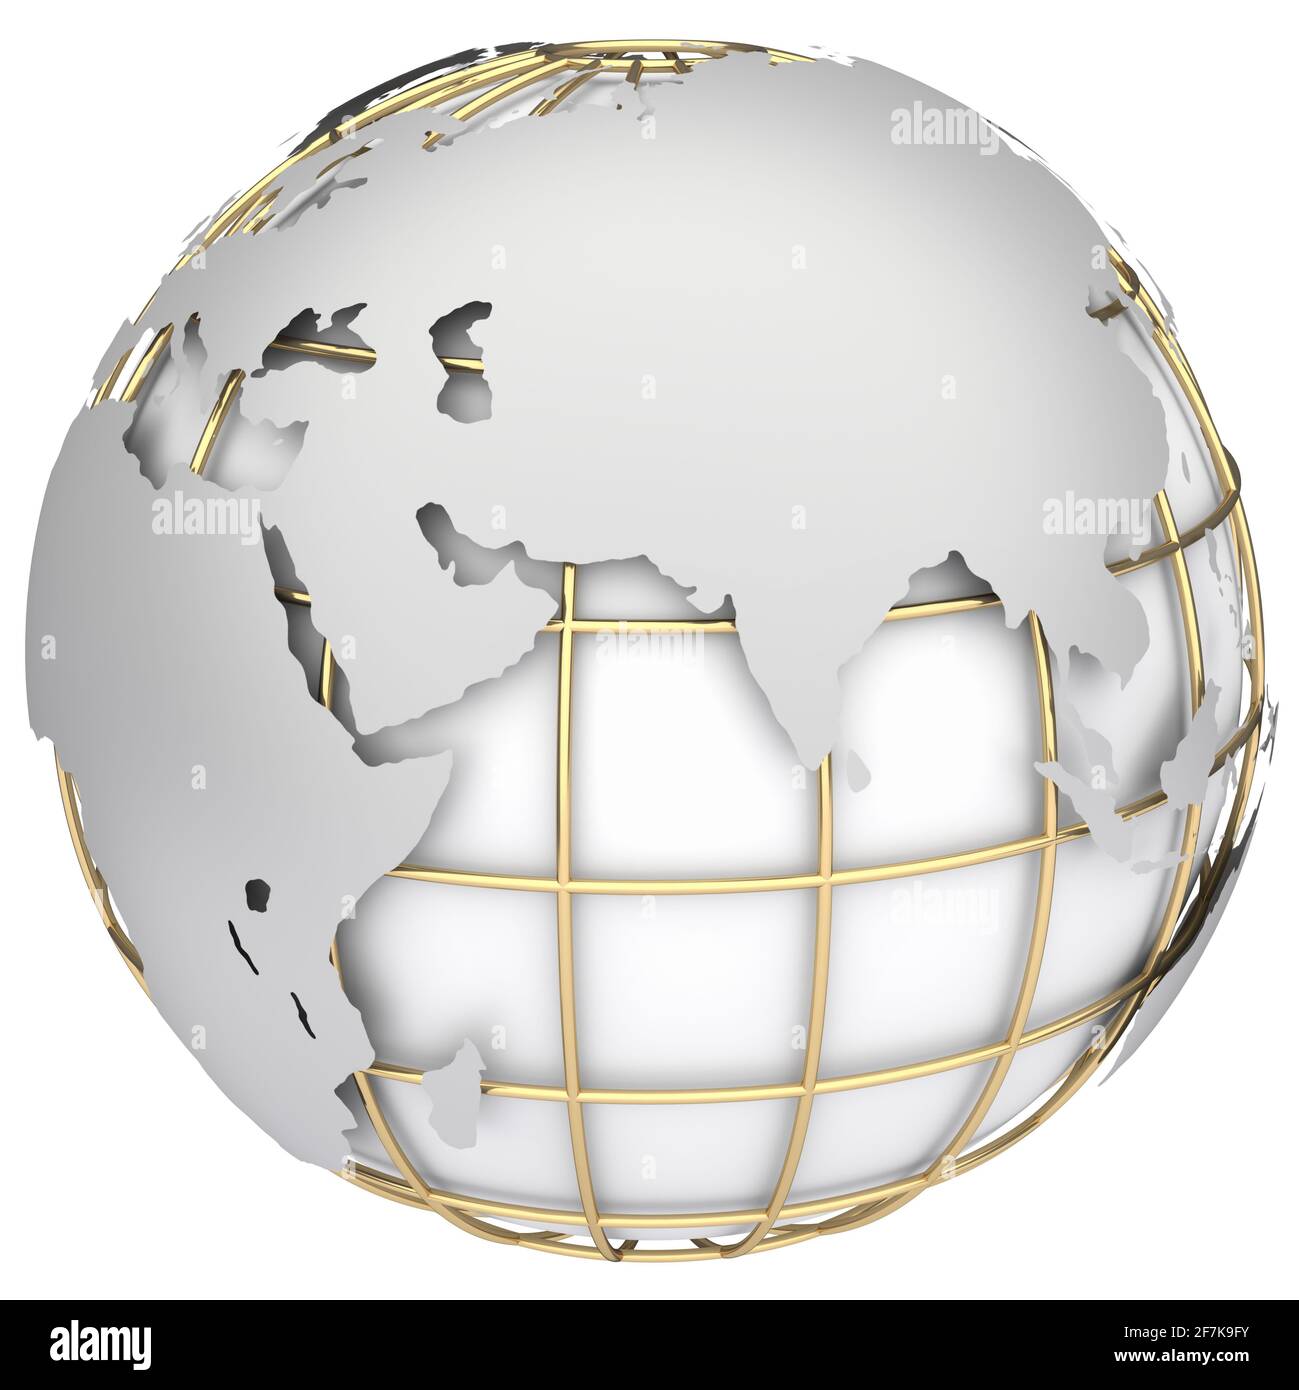 Earth world map.Africa, Europe and Azia on a planet globe Stock Photo